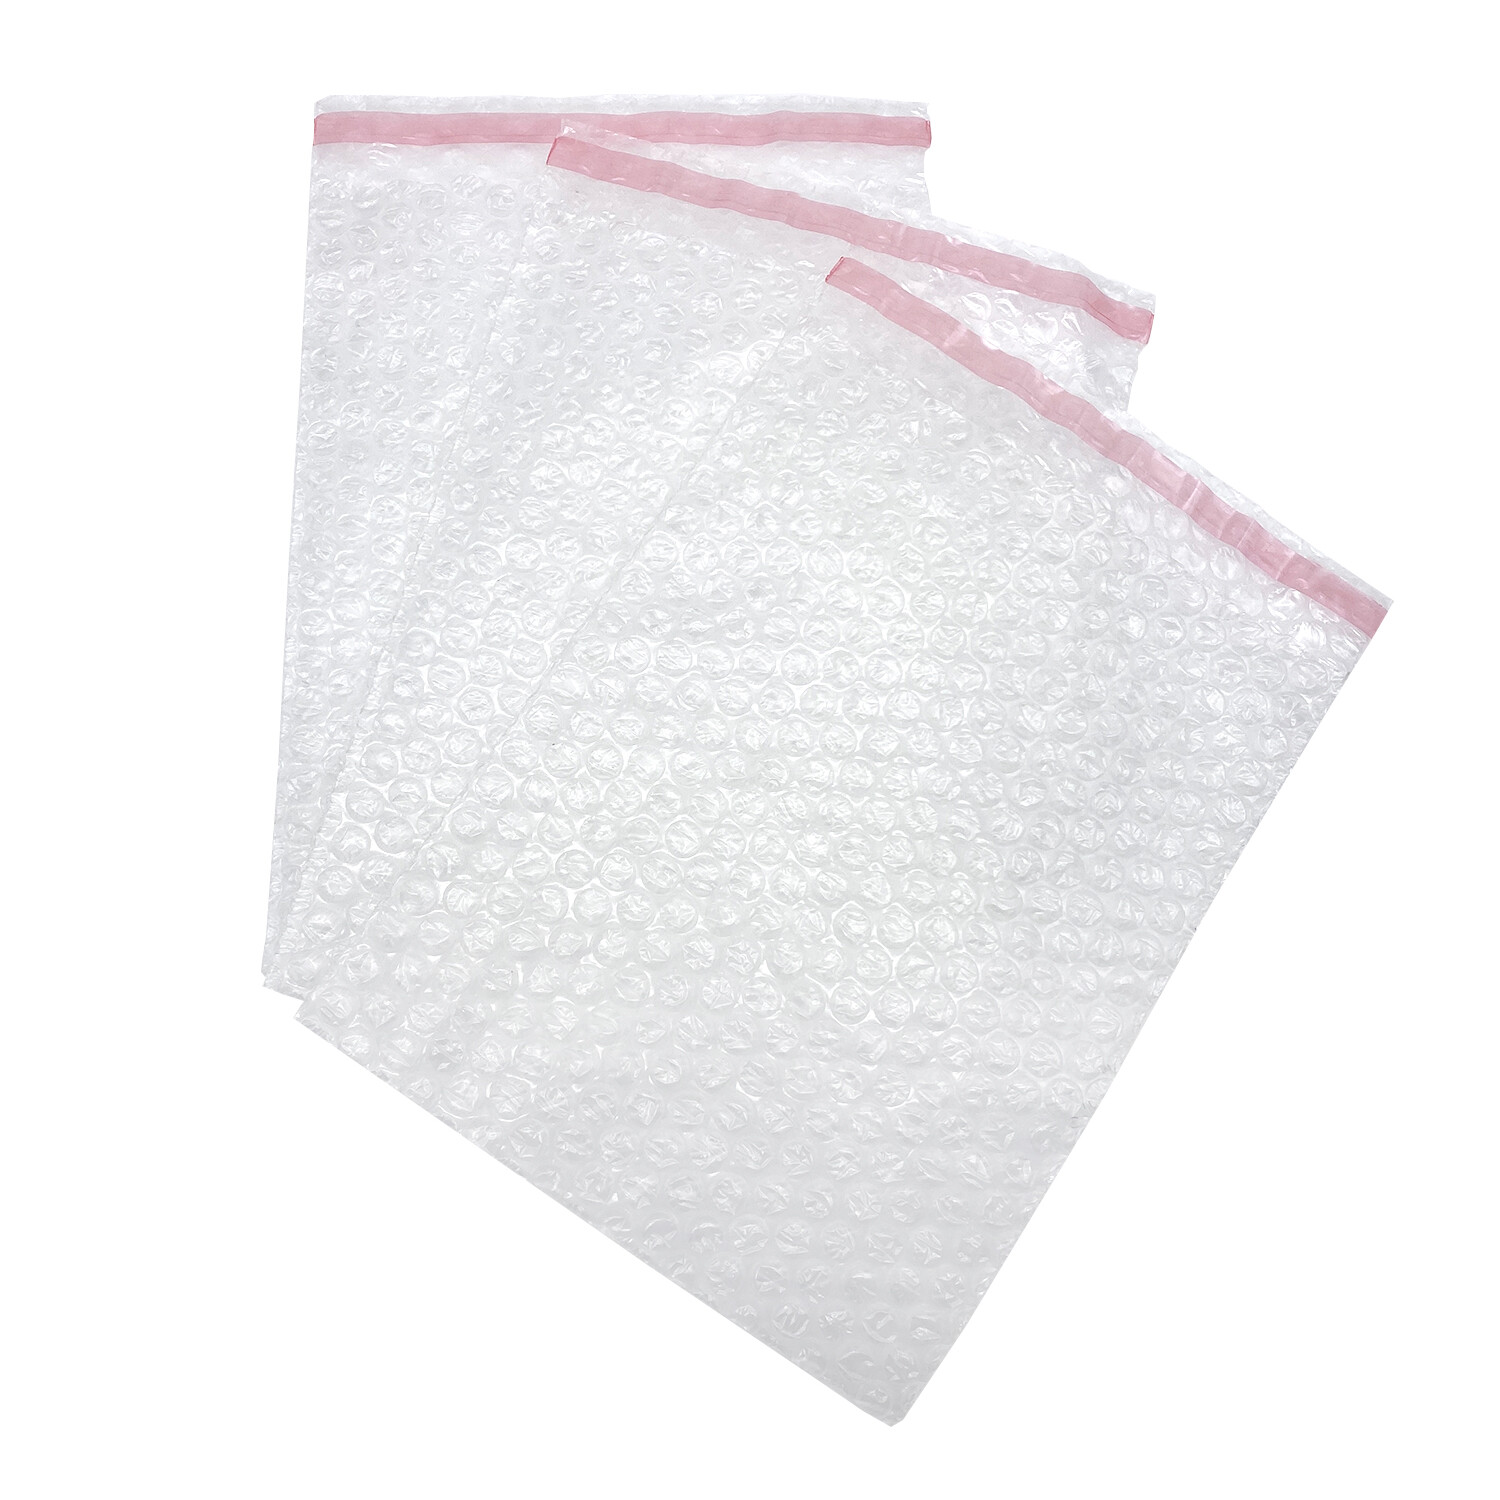 Size With Self Seal Flap 100 x 135mm 750 x BP1 Bubble Wrap Bags Pouches 